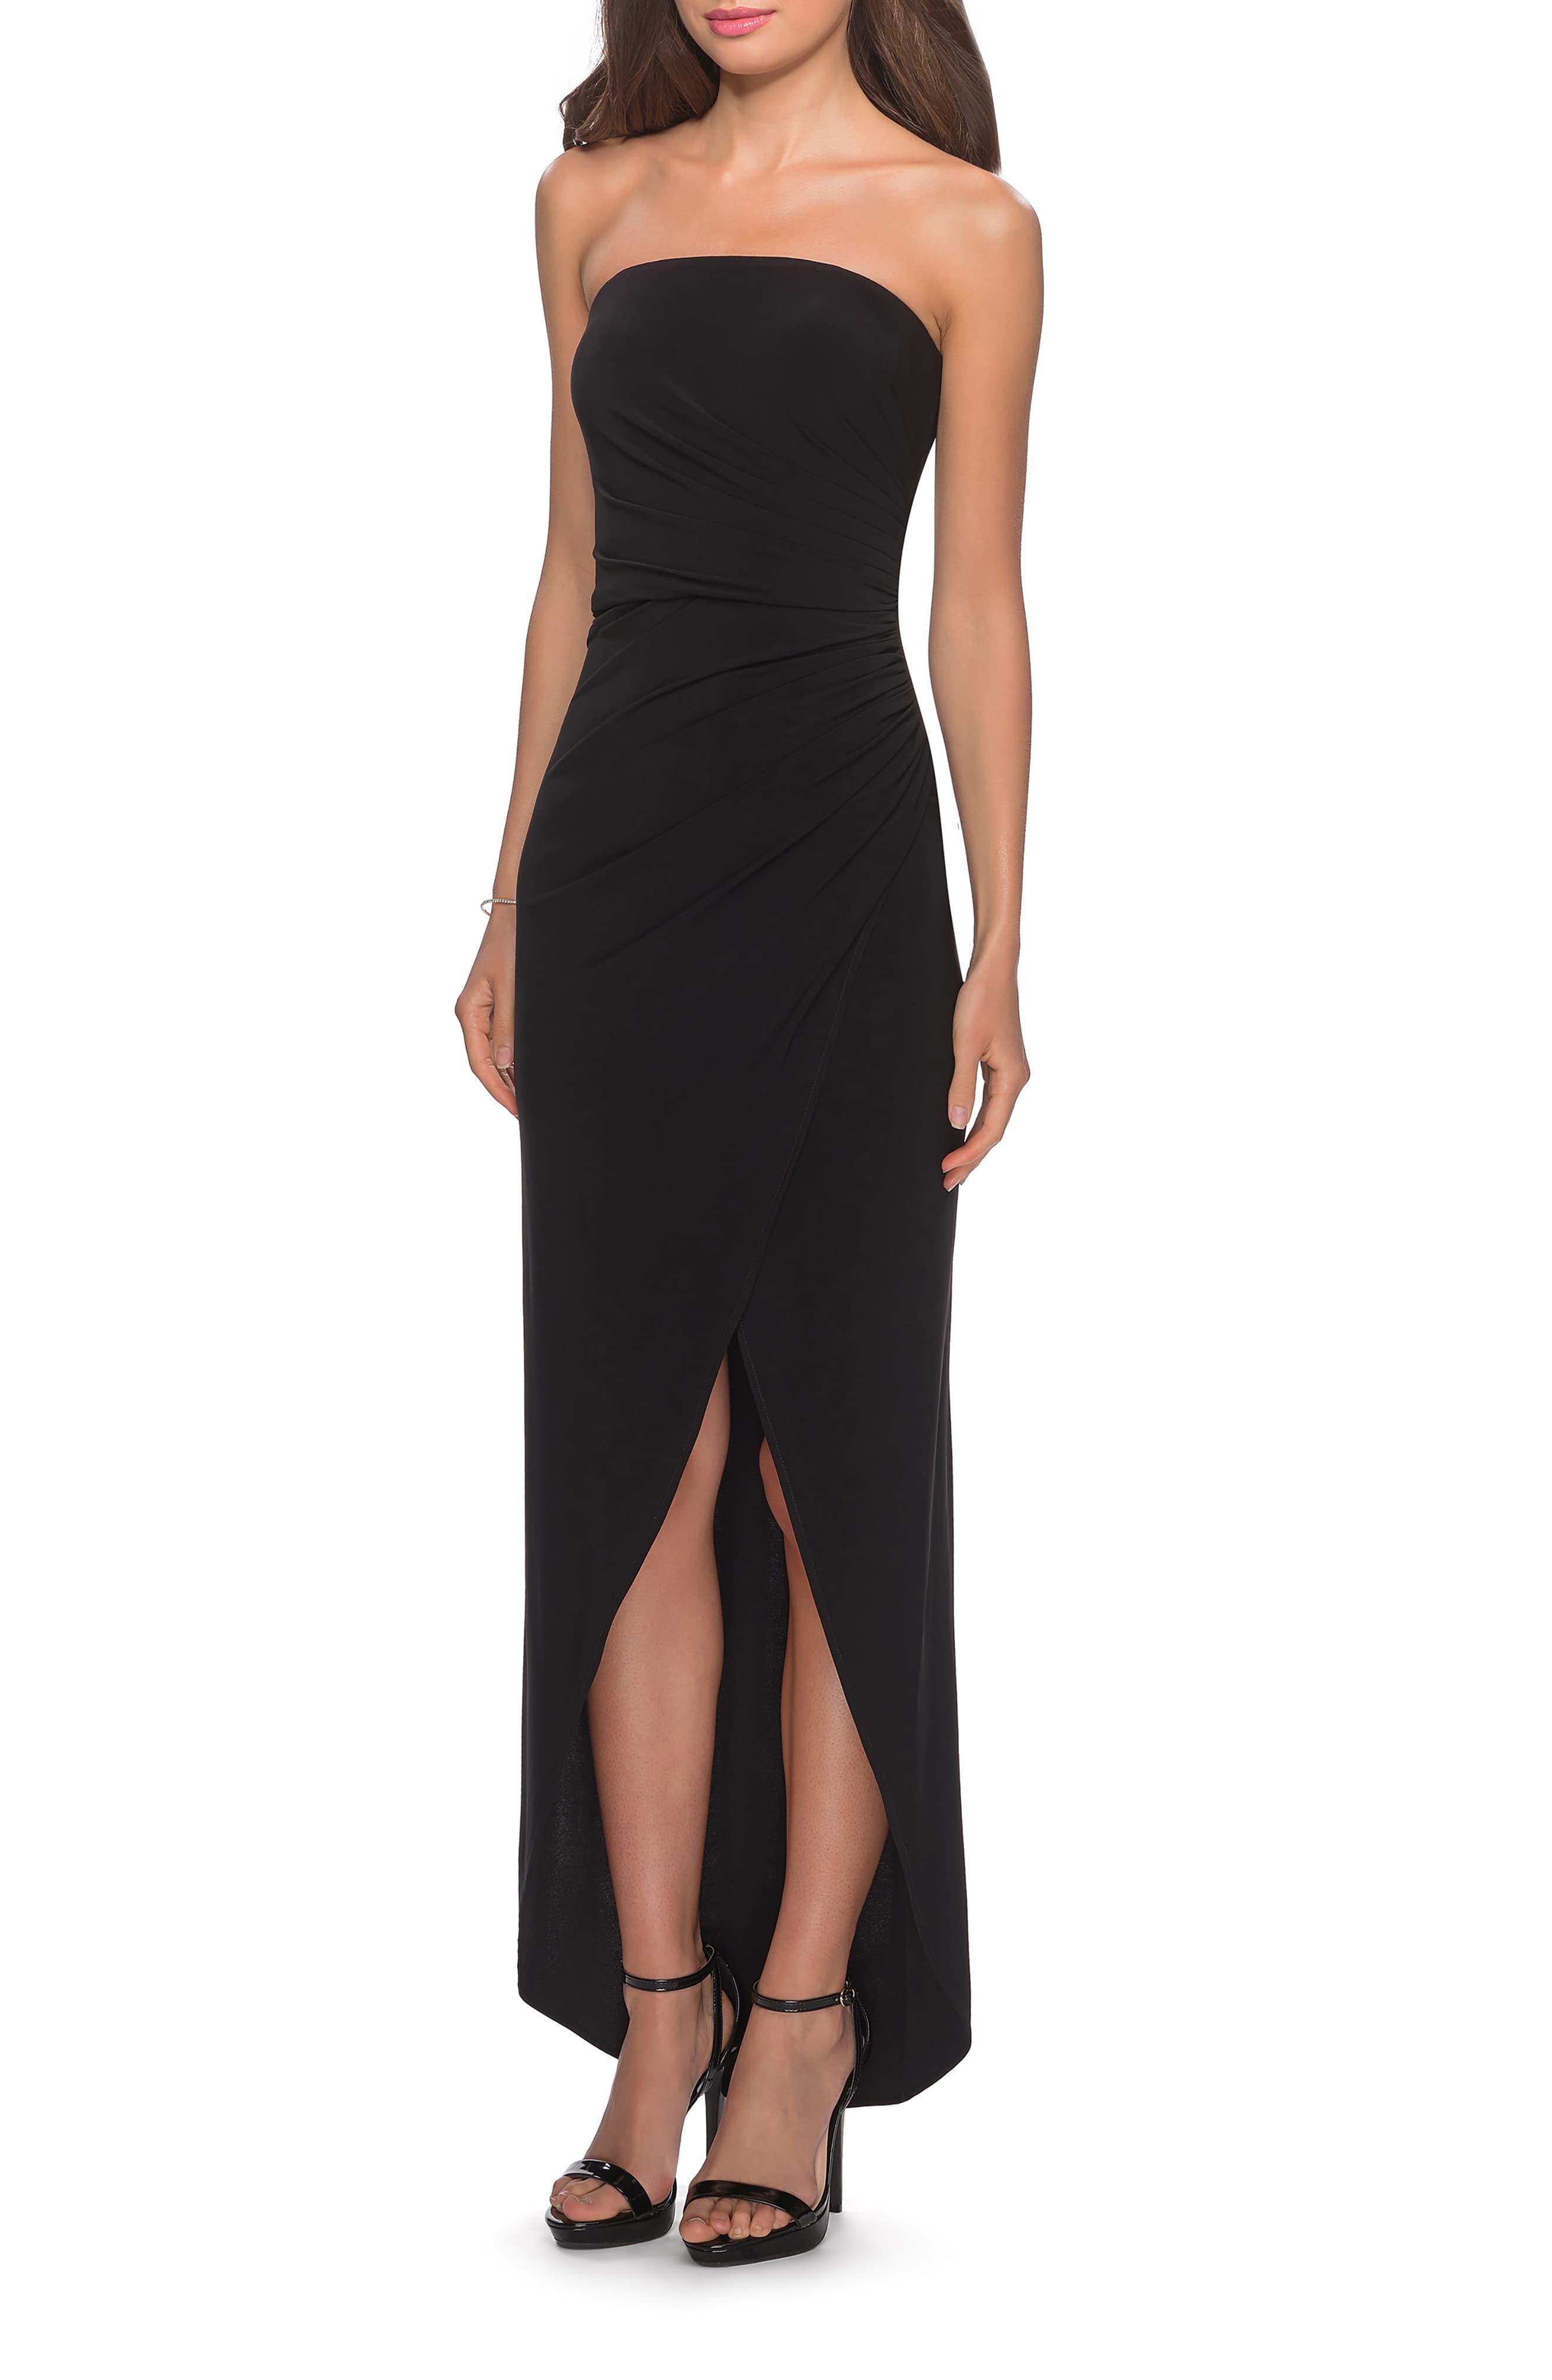 La Femme Strapless Ruched Soft Jersey Gown in Black - Lyst